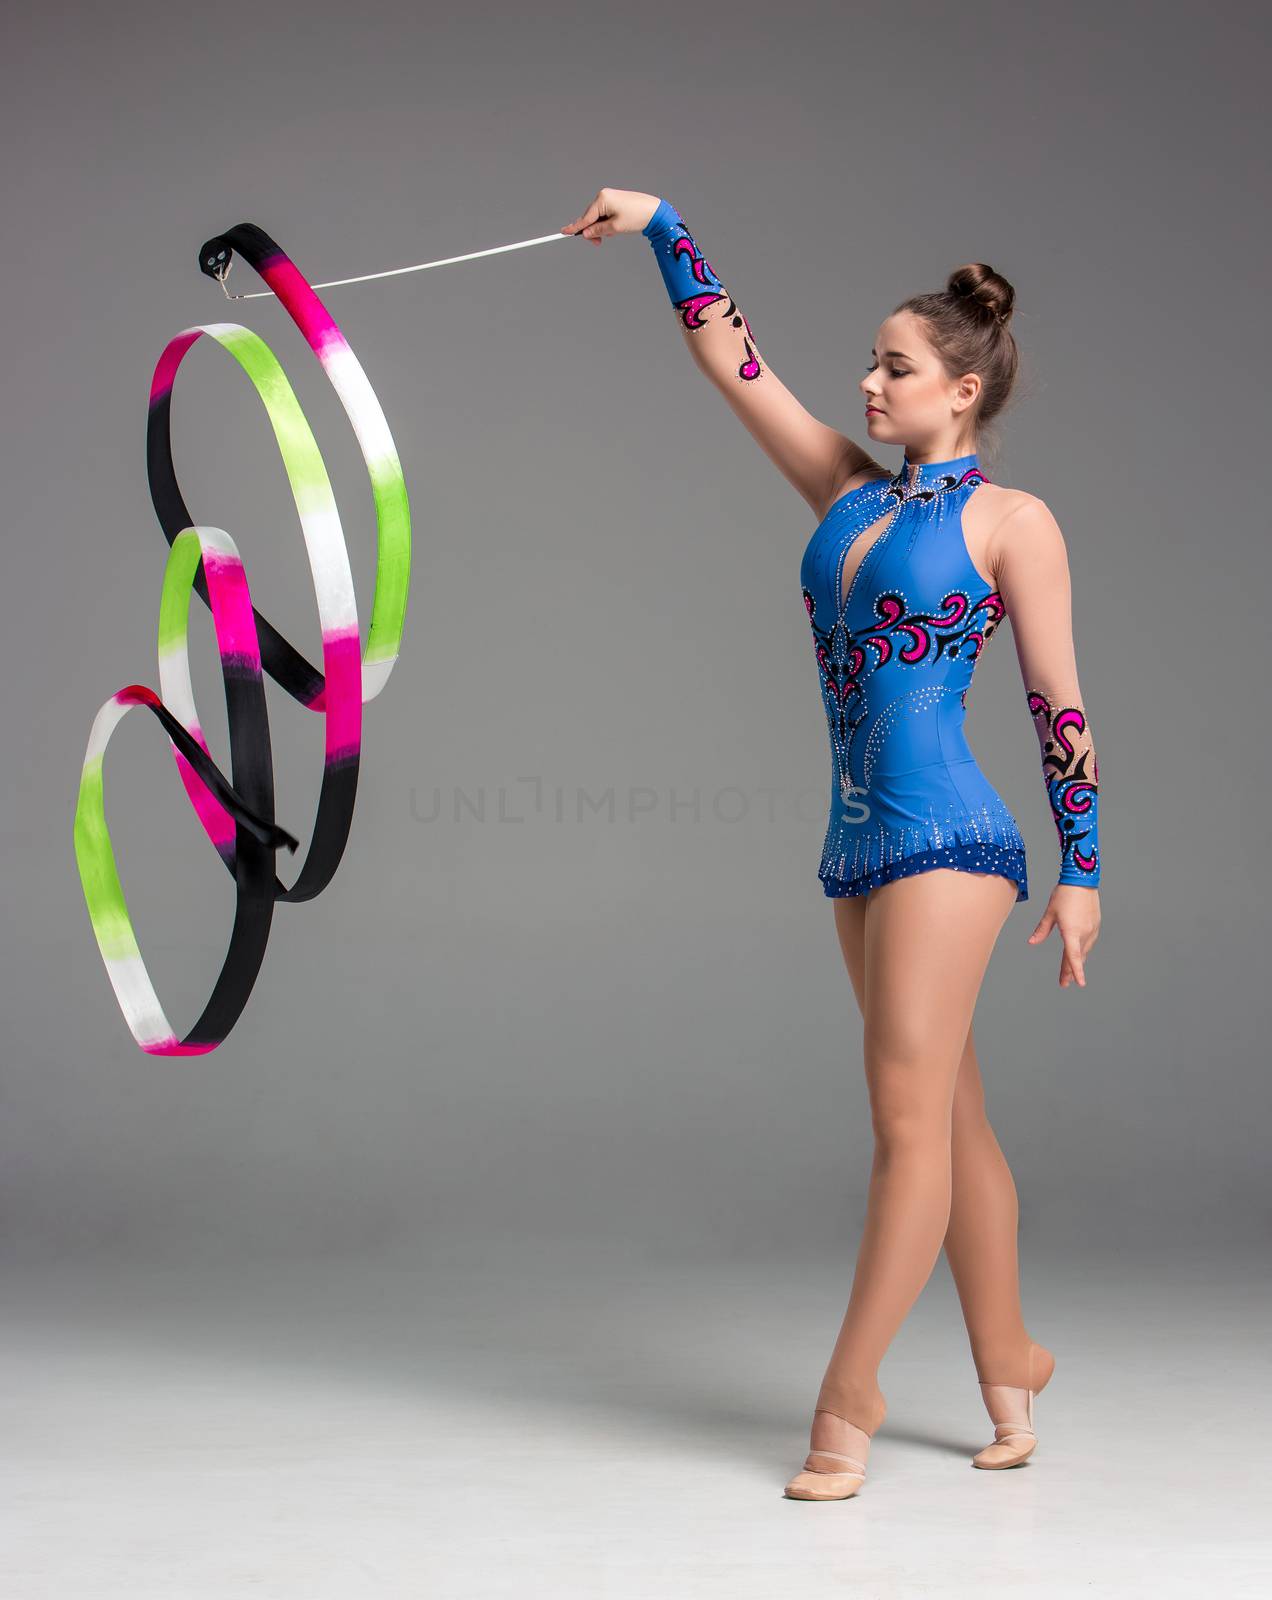 teenager doing gymnastics dance with colored ribbon on a gray background